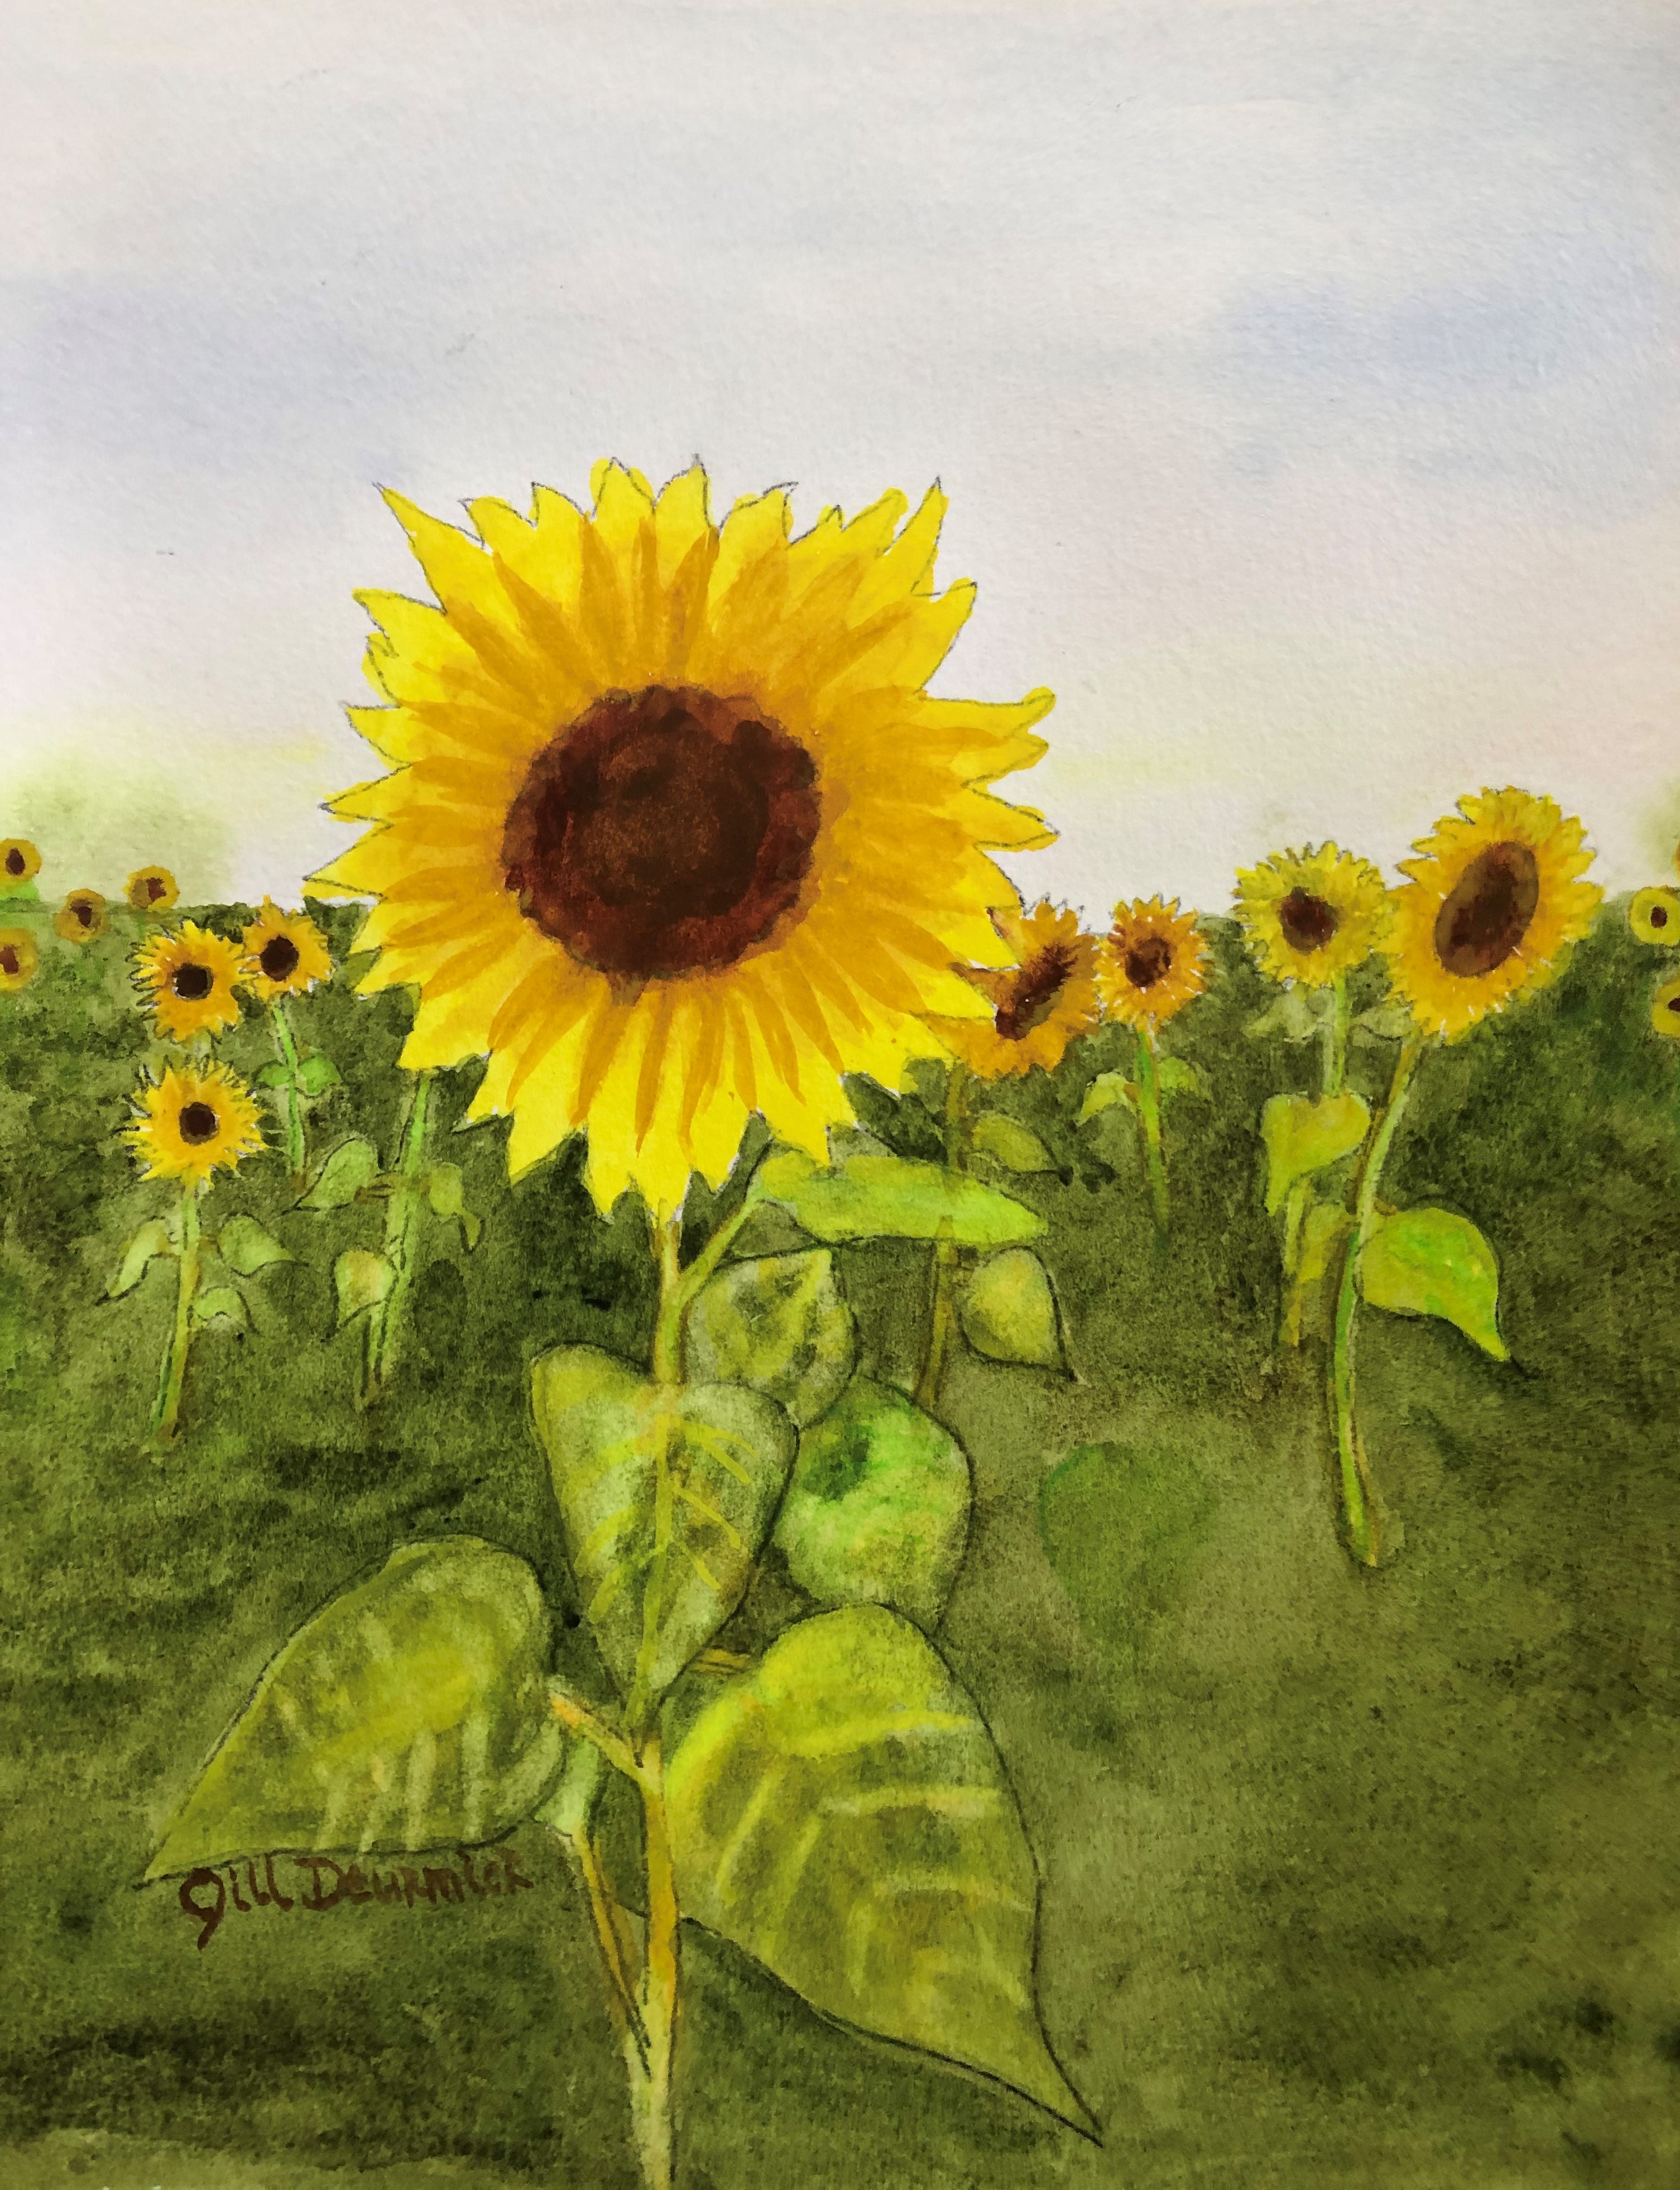 Watercolor painting of sunflowers